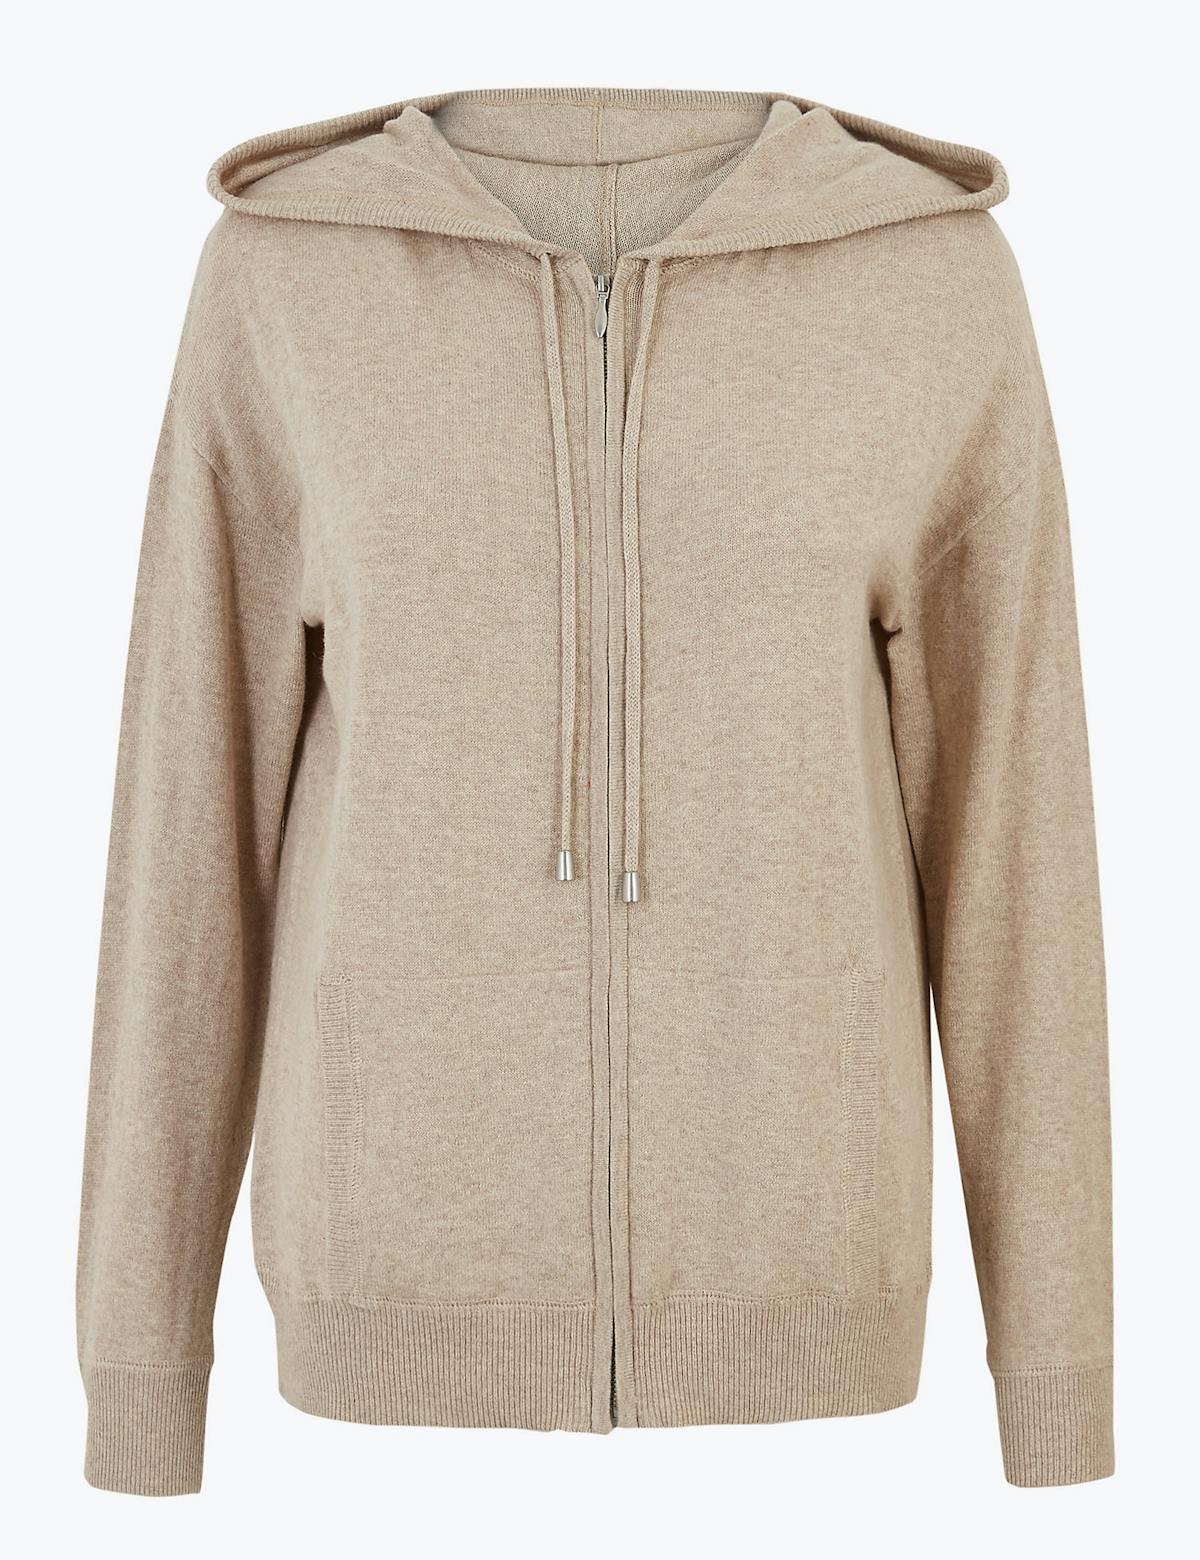 Top 10 chicest and cosiest hoodies